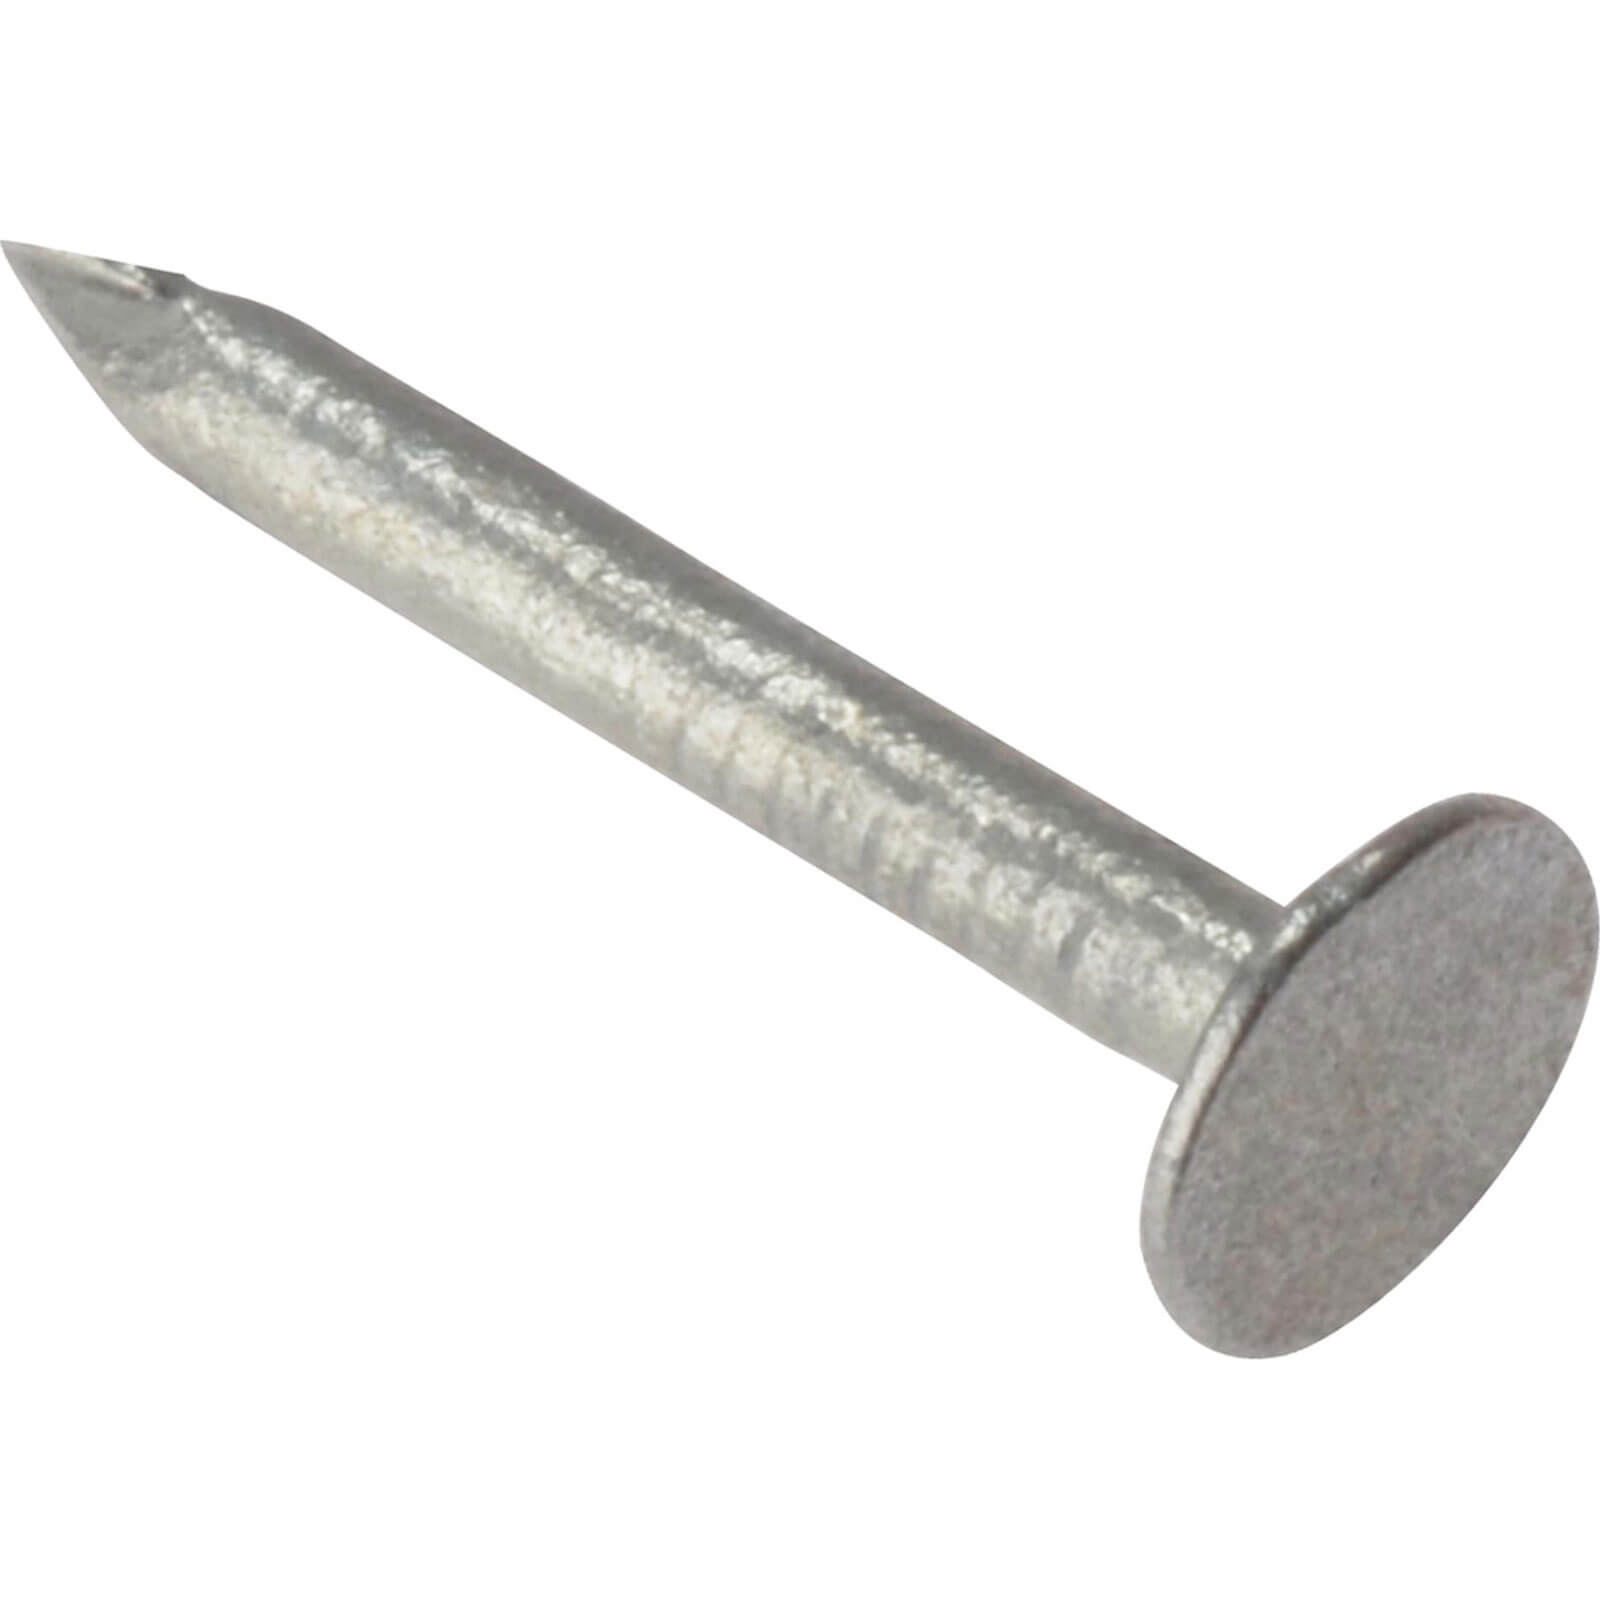 Photos - Nail / Screw / Fastener Forgefix Multipurpose Galvanised Clout Nails 30mm 2.5kg 212NLC30265GB 